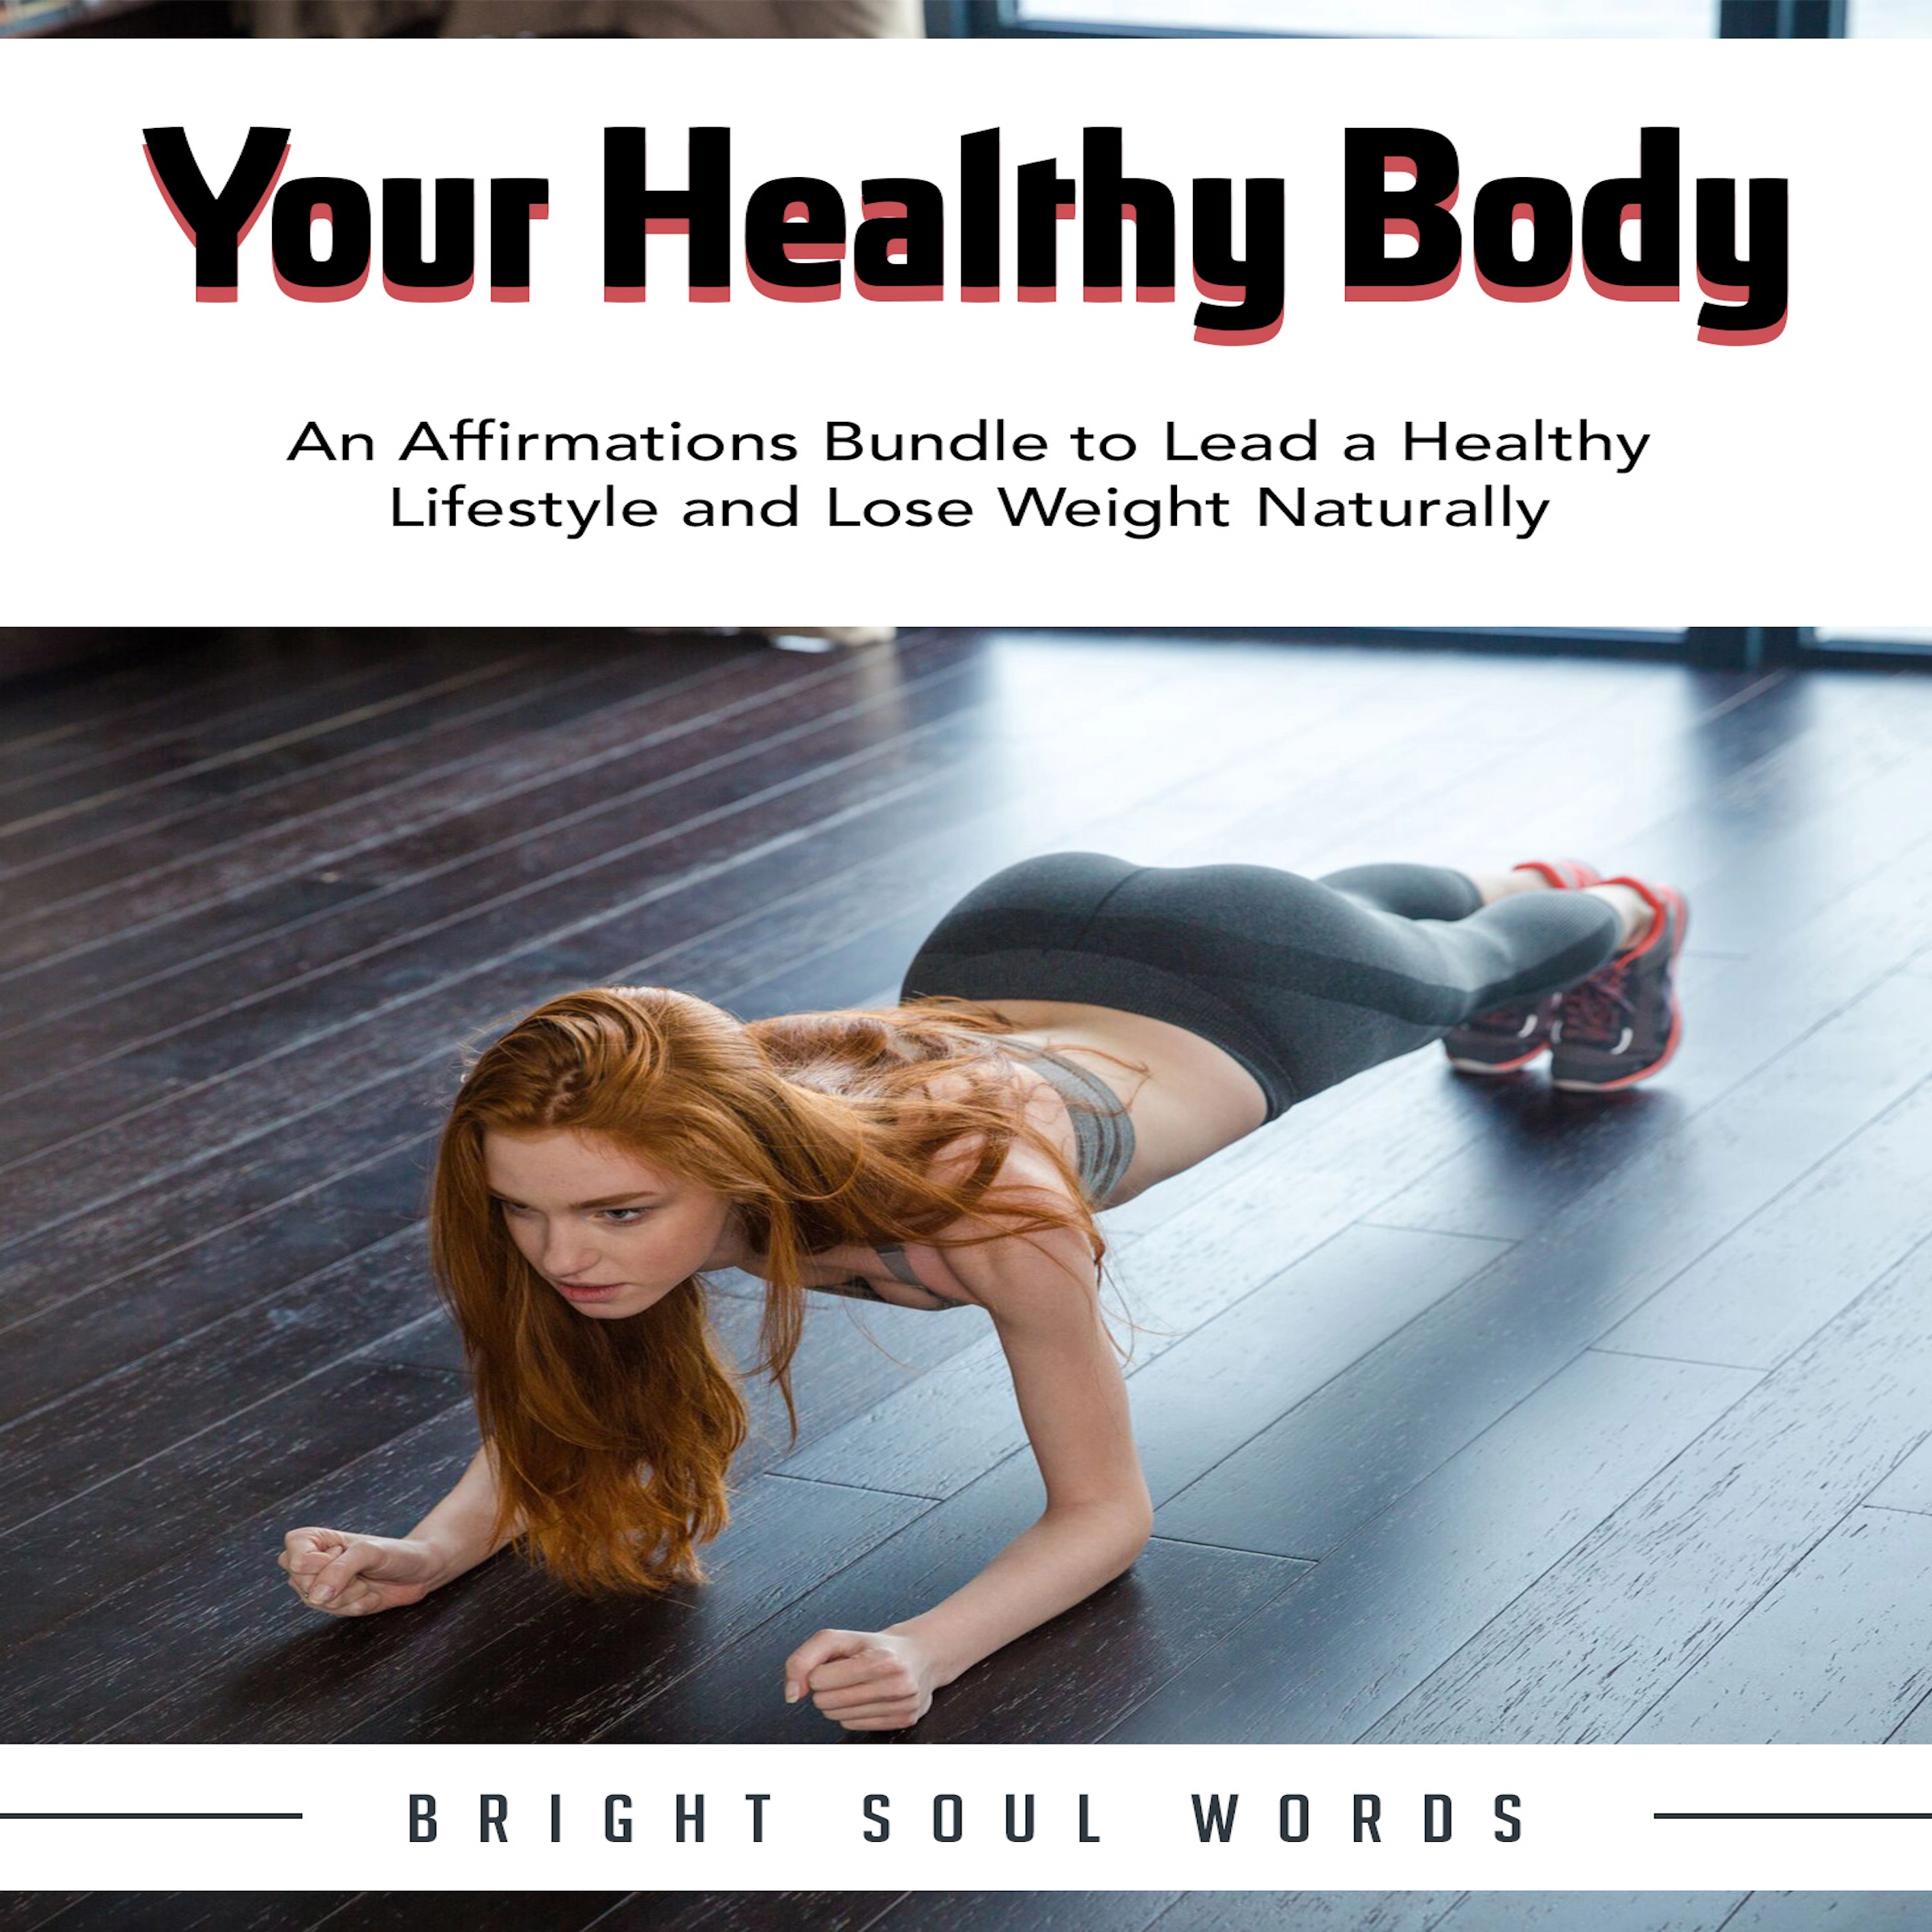 Your Healthy Body: An Affirmations Bundle to Lead a Healthy Lifestyle and Lose Weight Naturally Audiobook by Bright Soul Words